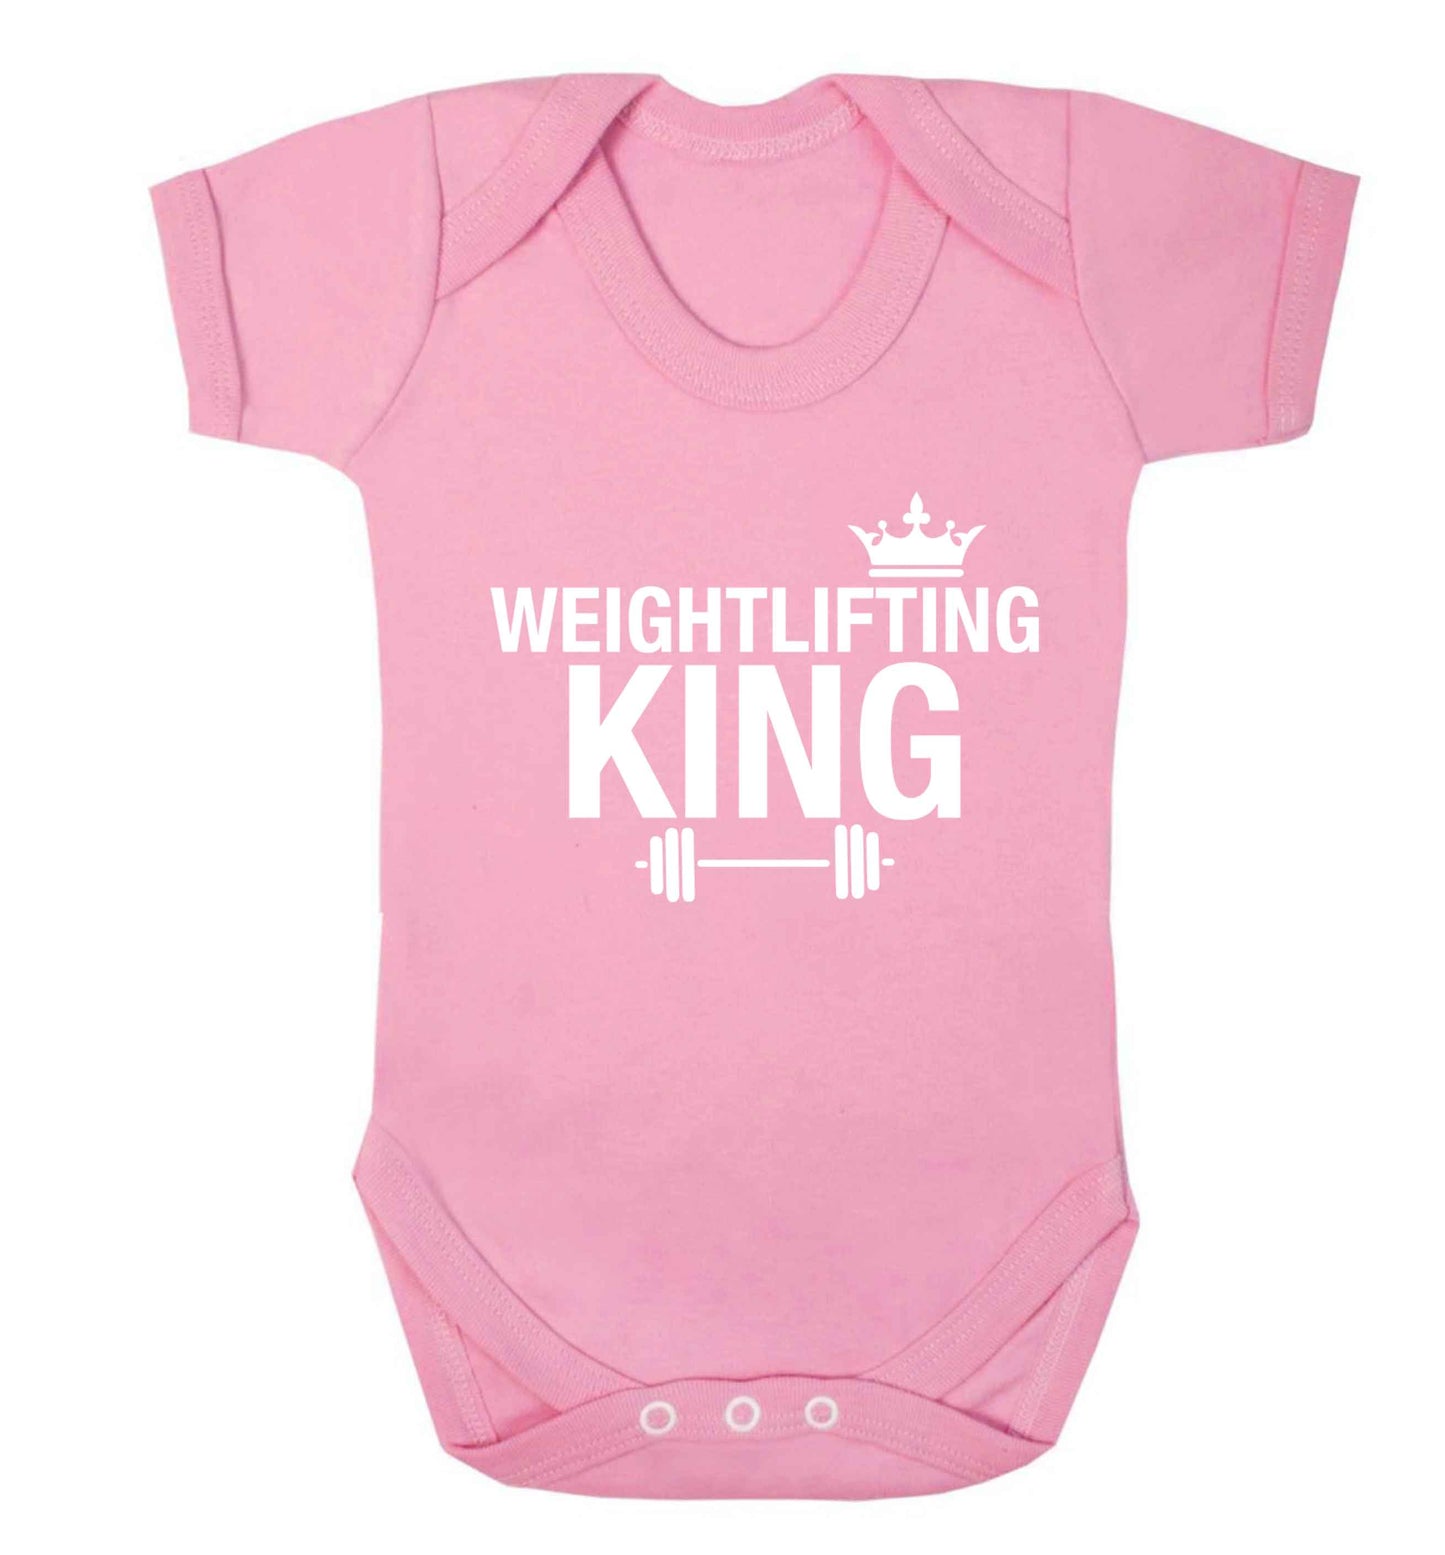 Weightlifting king Baby Vest pale pink 18-24 months